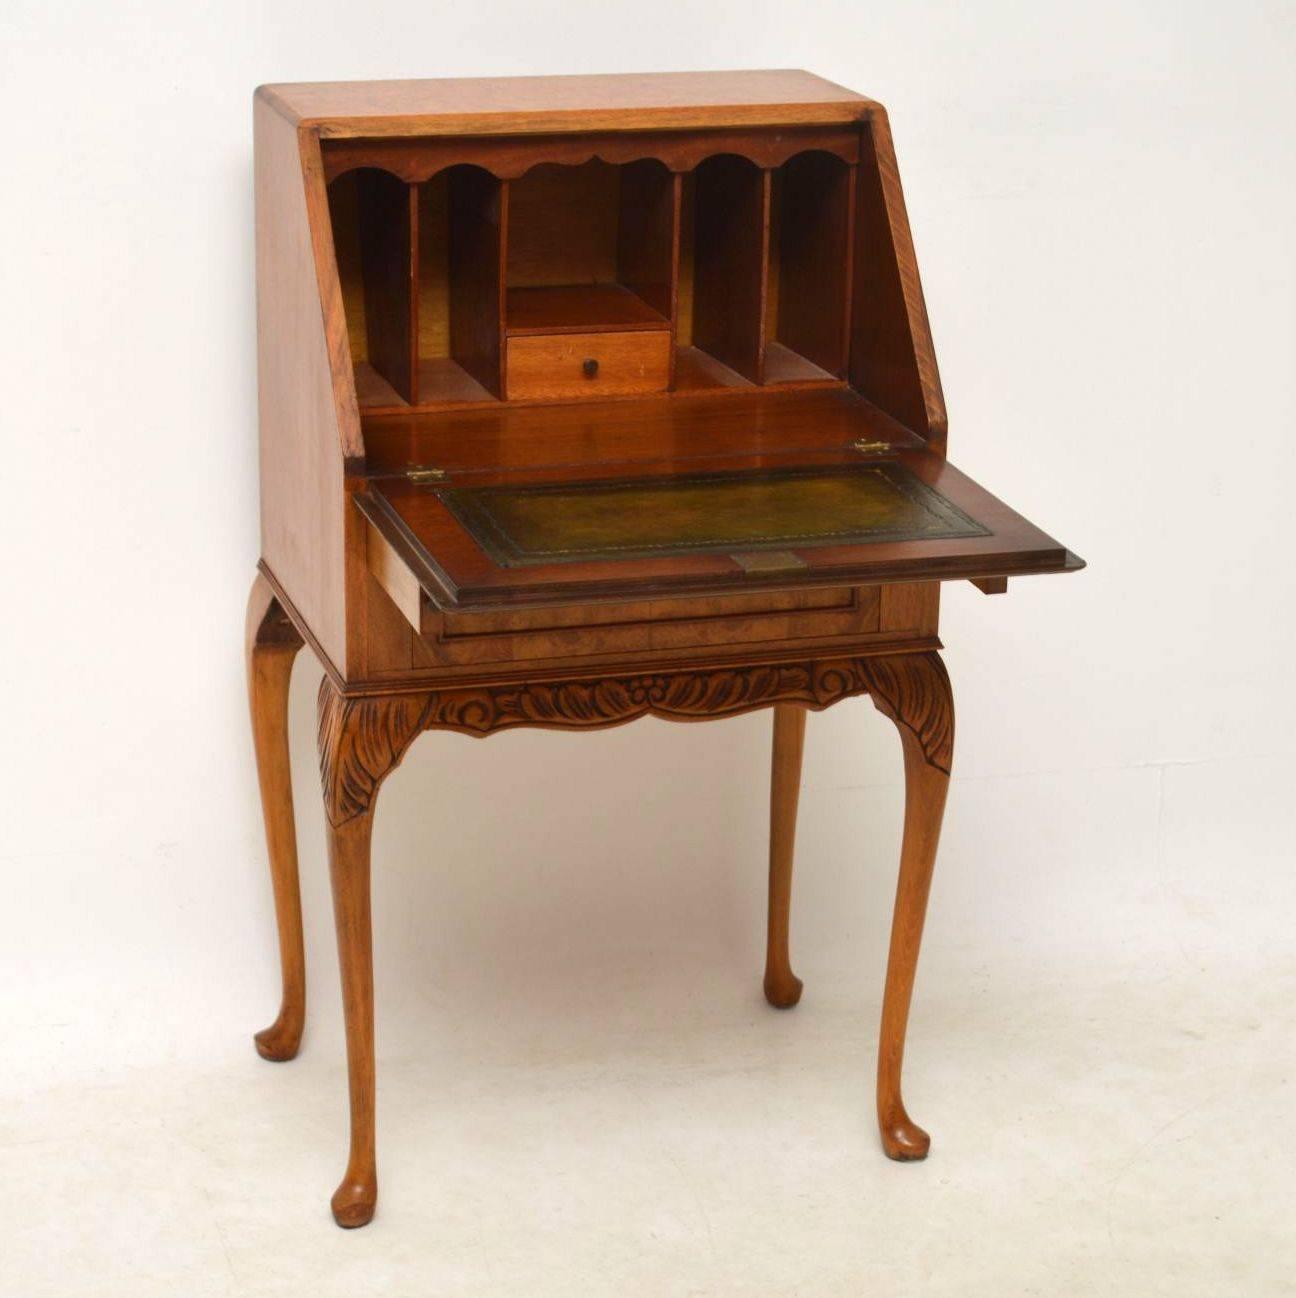 Small antique burr maple and walnut bureau in good condition, dating to circa 1930s period. It has two manual loafers which support the drop down flap. Inside, is a tooled leather writing surface, plus pigeon holes and one small drawer. This bureau